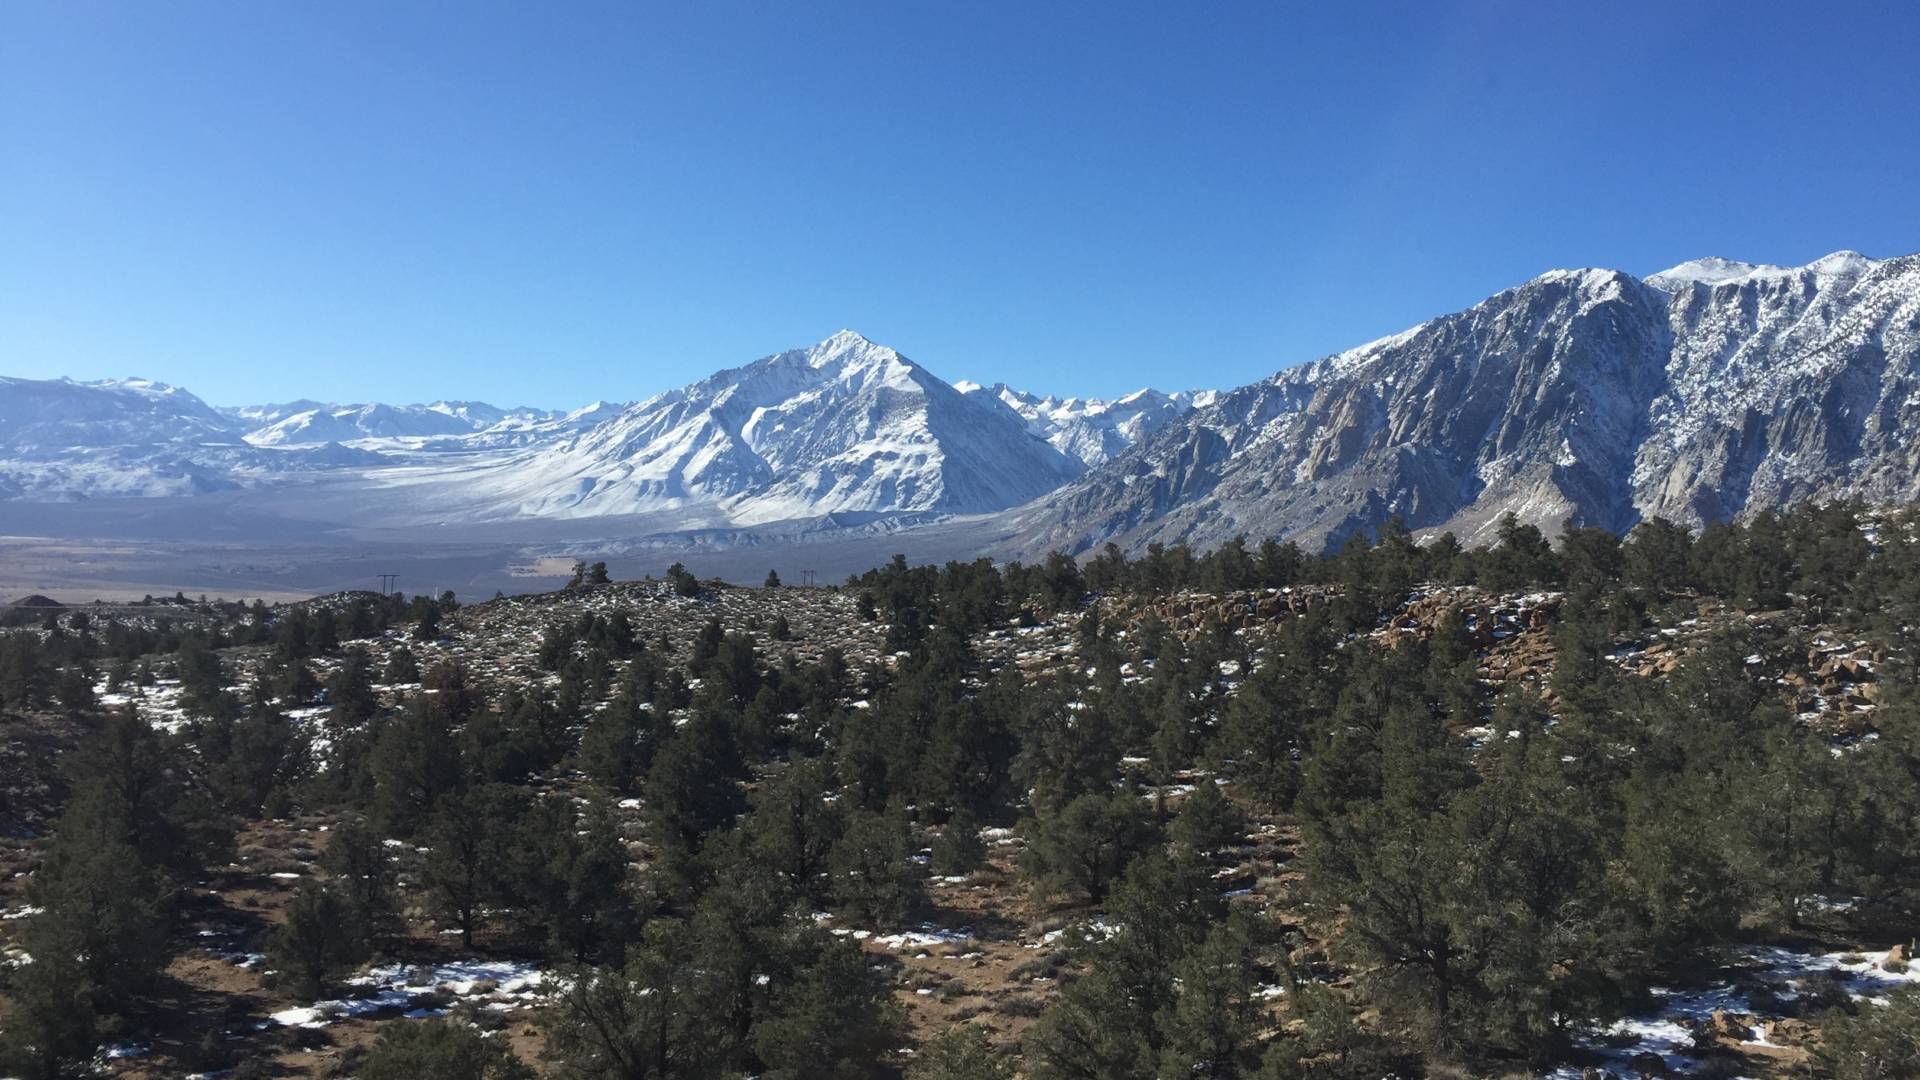 The Eastern Sierra Nevada  near Mammoth Lakes. The town is surrounded by U.S. Forest Service and Bureau of Land Management land and, with the government shutdown, 'the landlords are absent.' Kirk Siegler/NPR